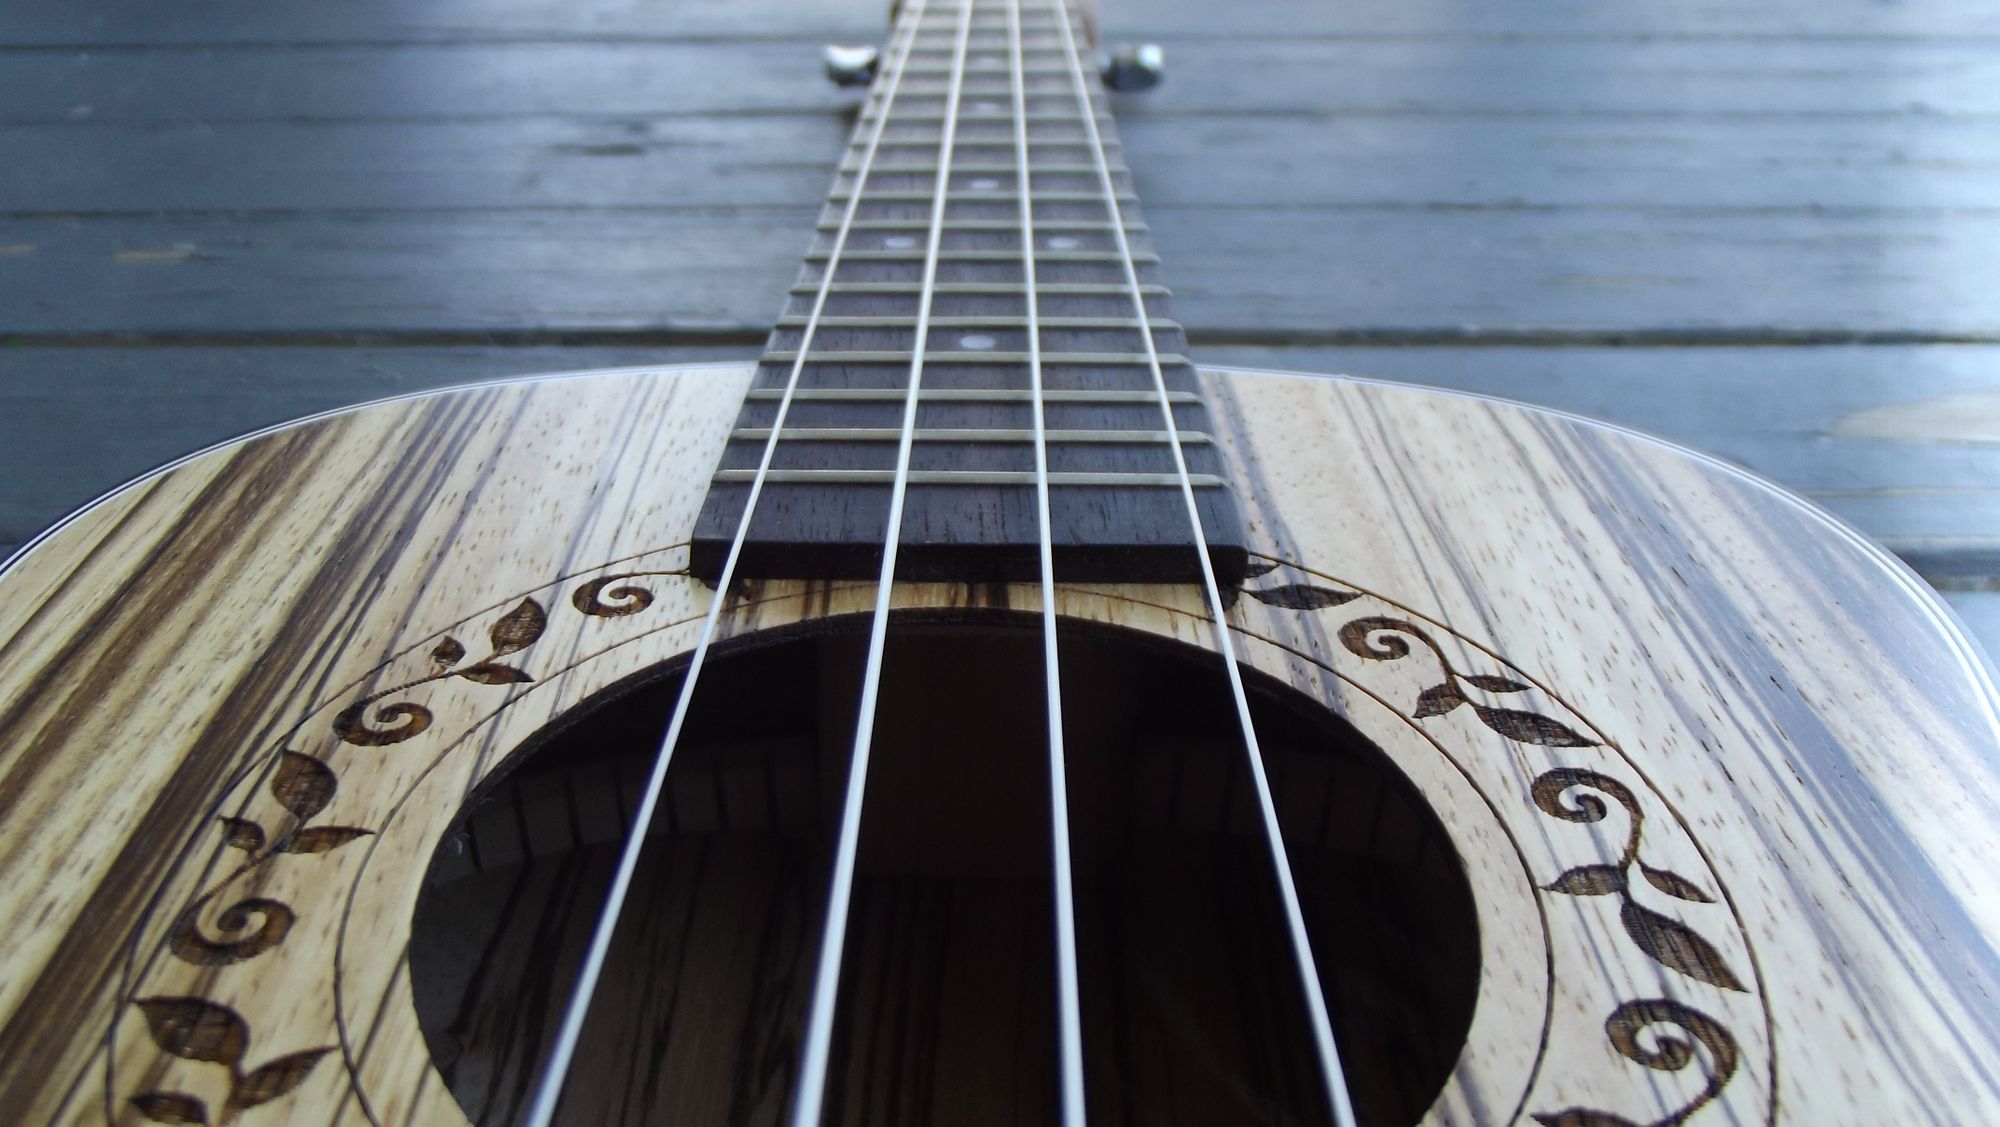 Why guitar frets work (and why violins don't have them)